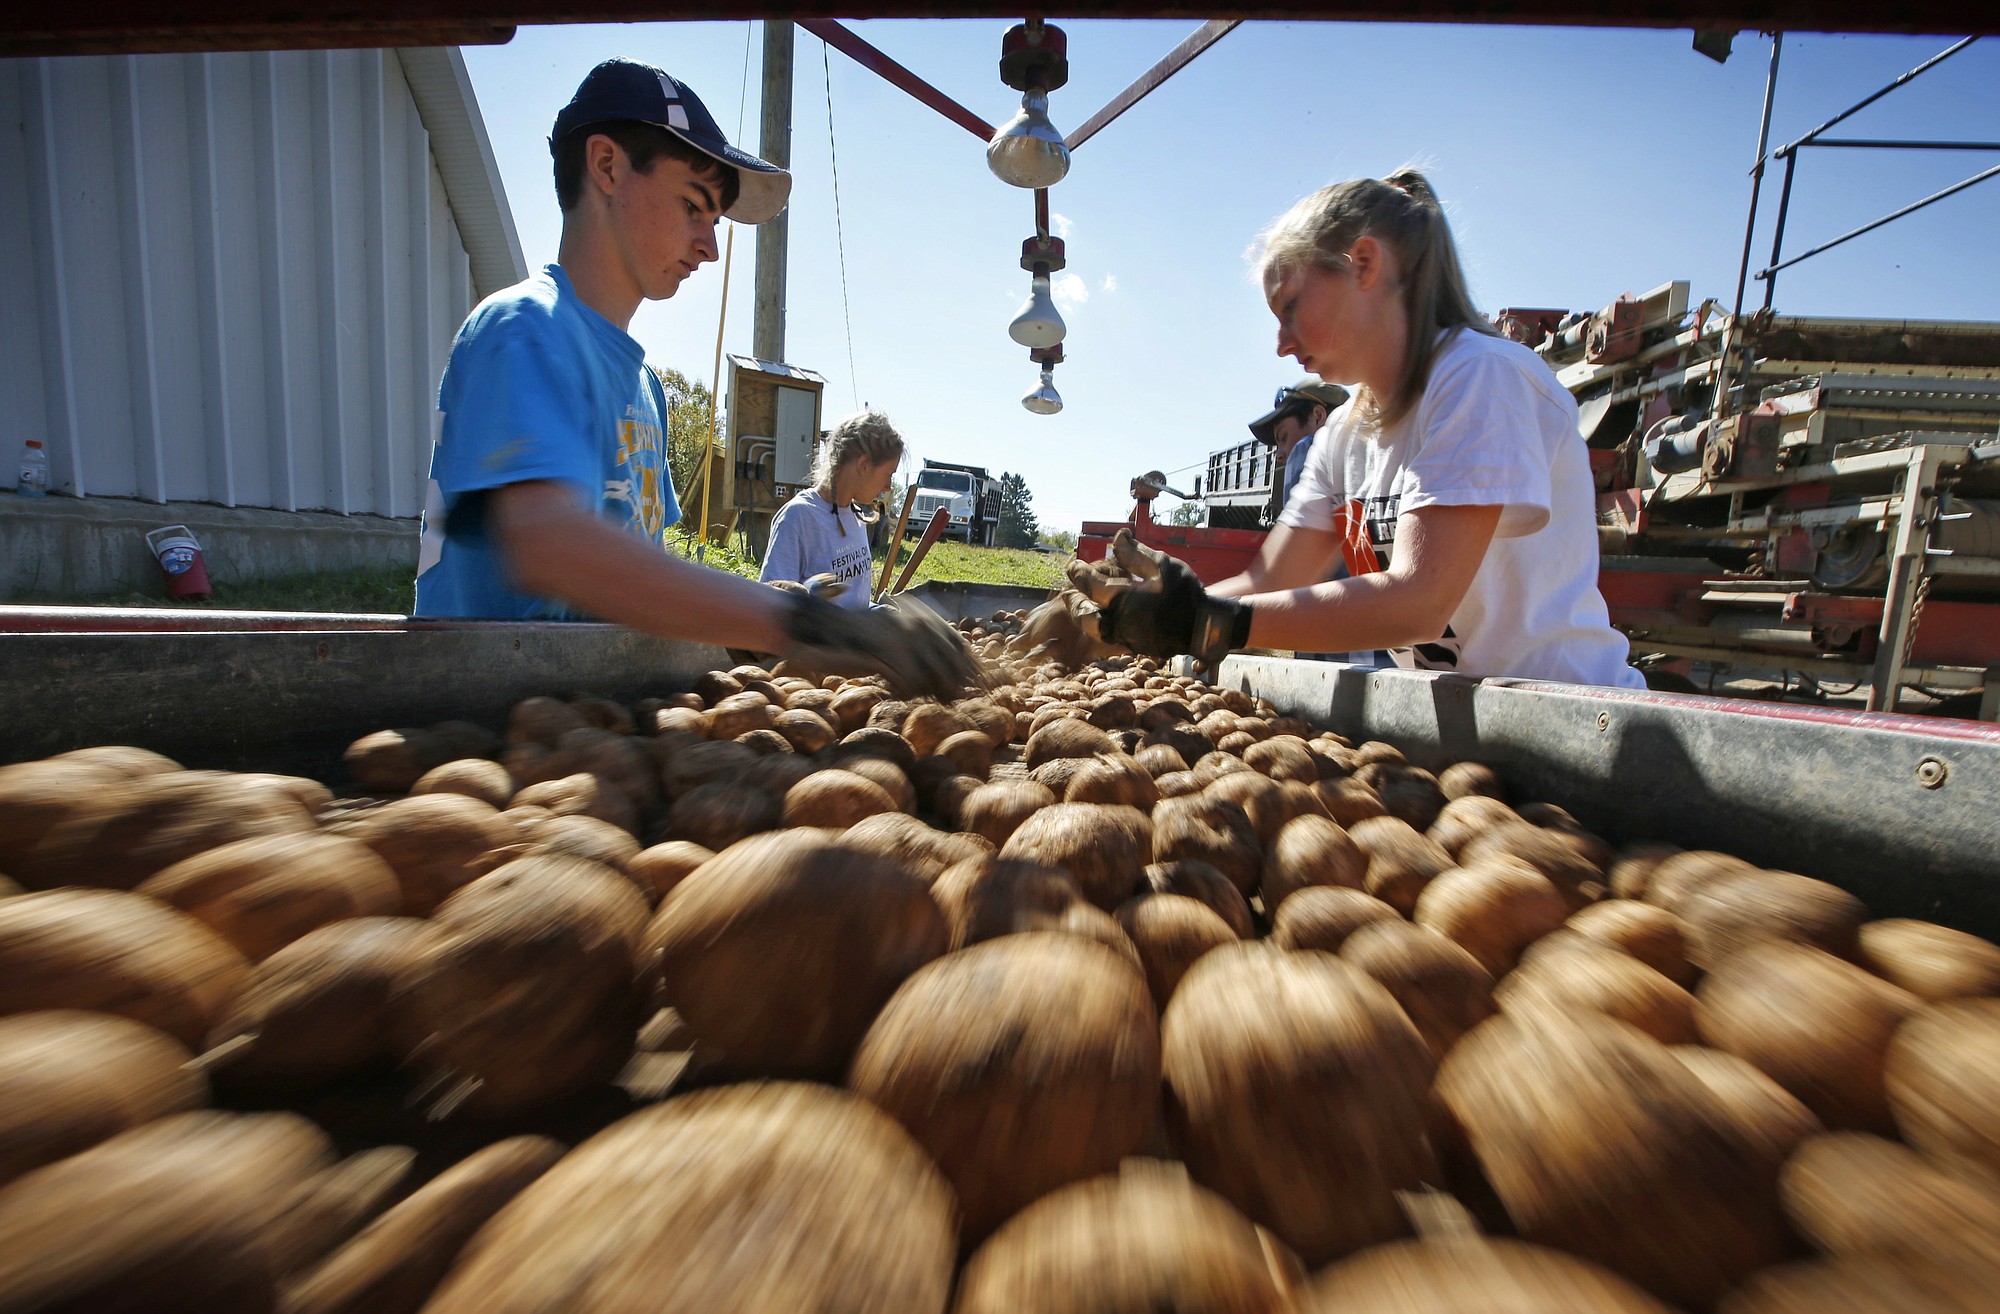 High school students pulls rocks and unwanted materials from a conveyor belt moving potatoes into storage facility in Mapleton, Maine.